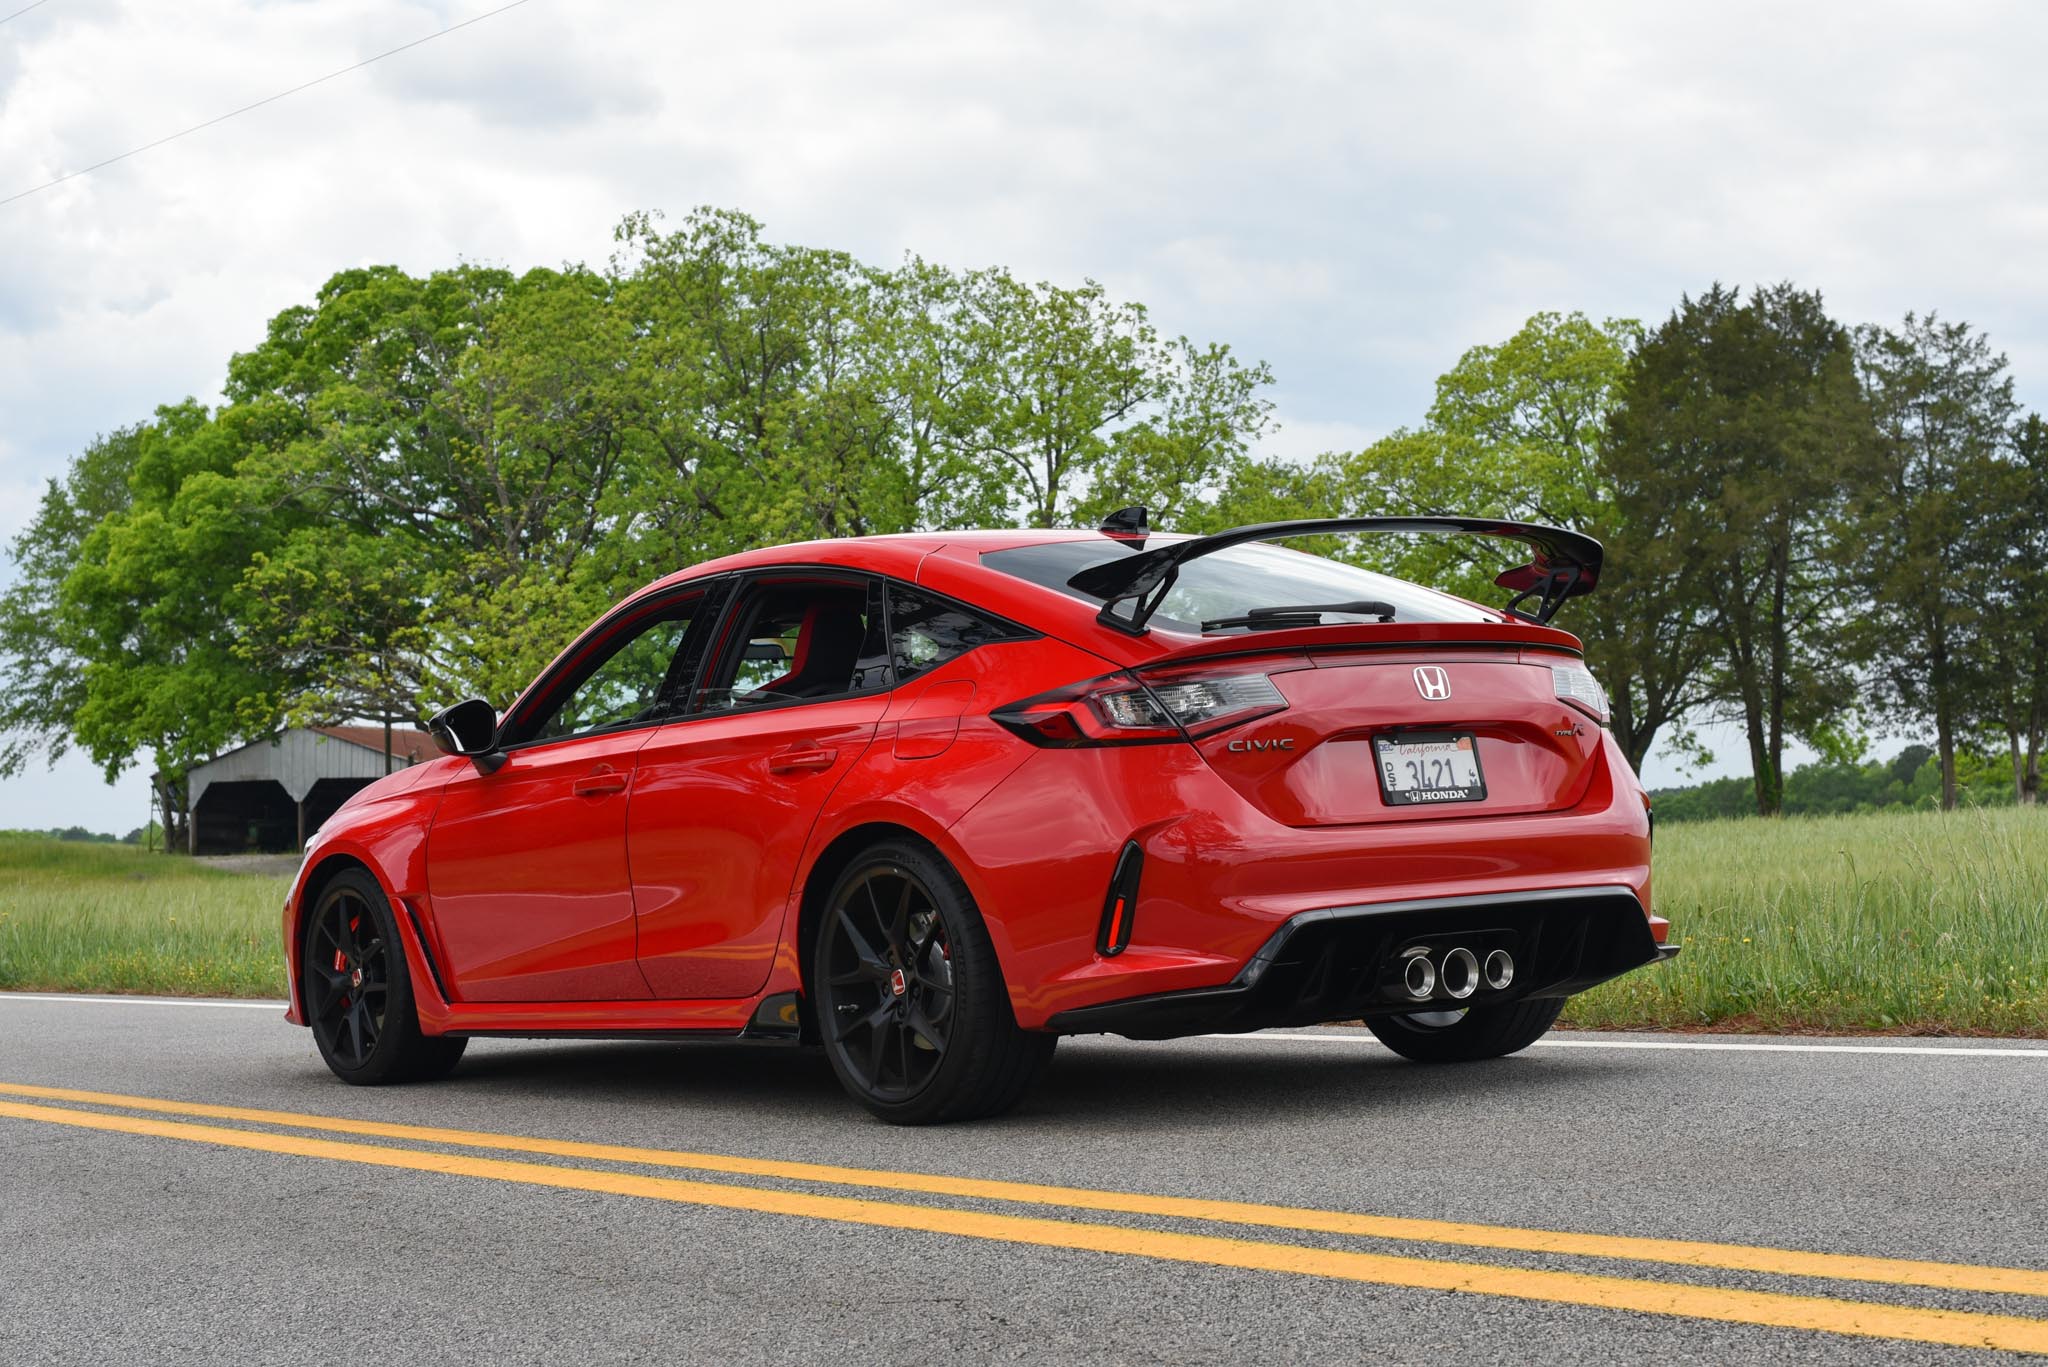 Civic Type-R or